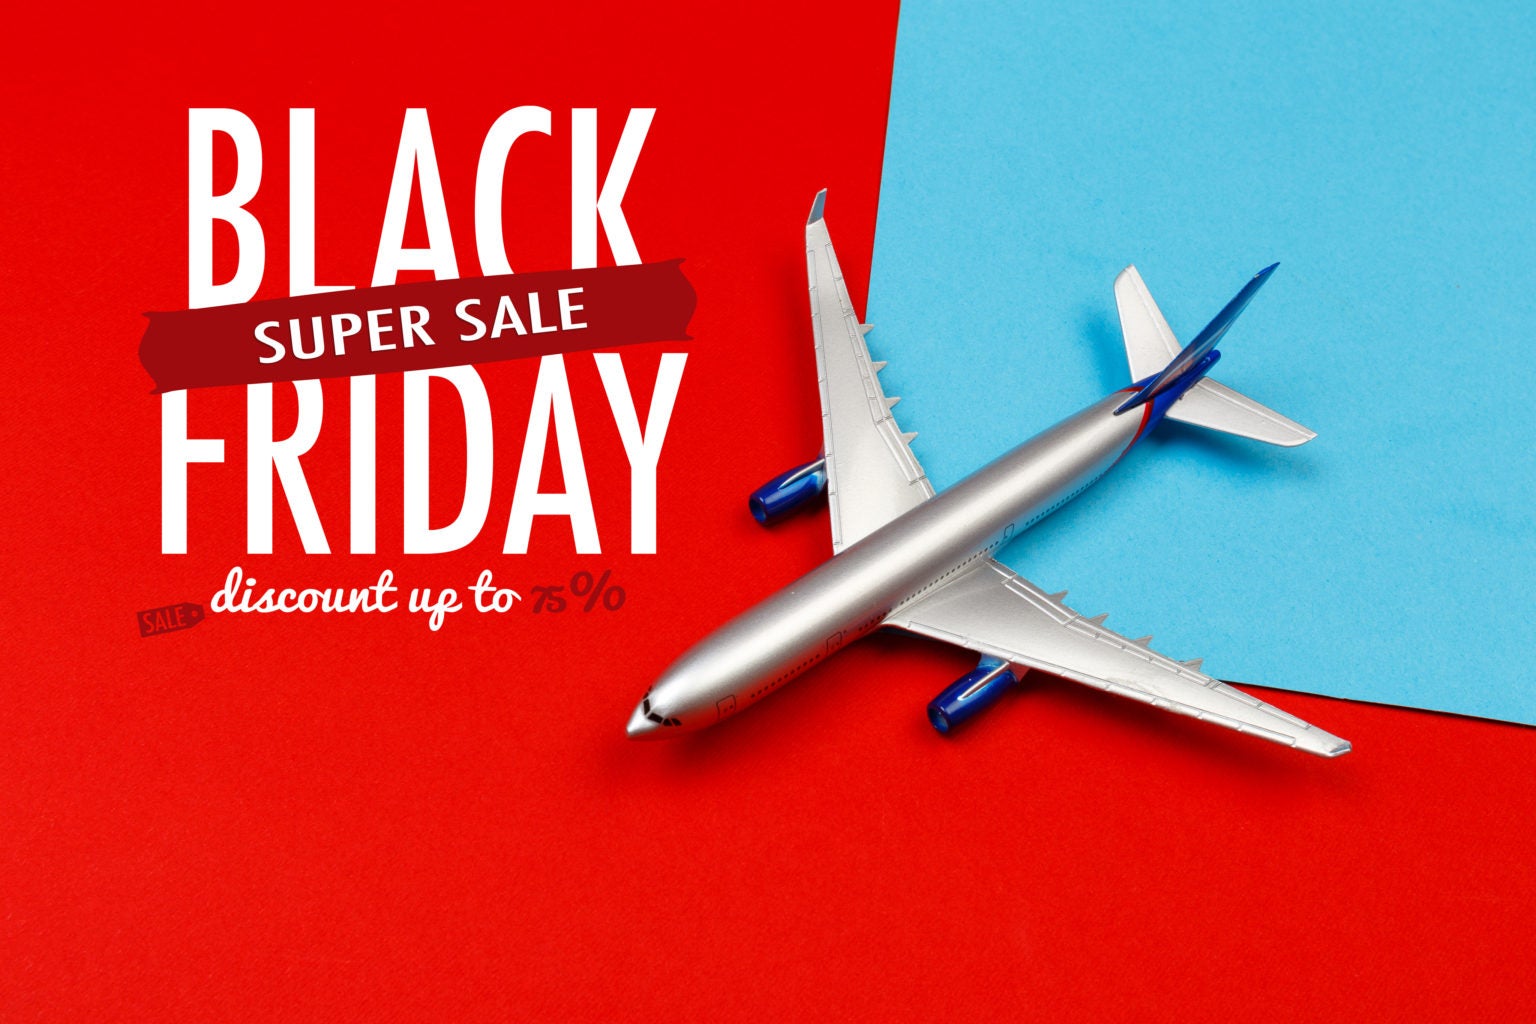 black friday travel packages